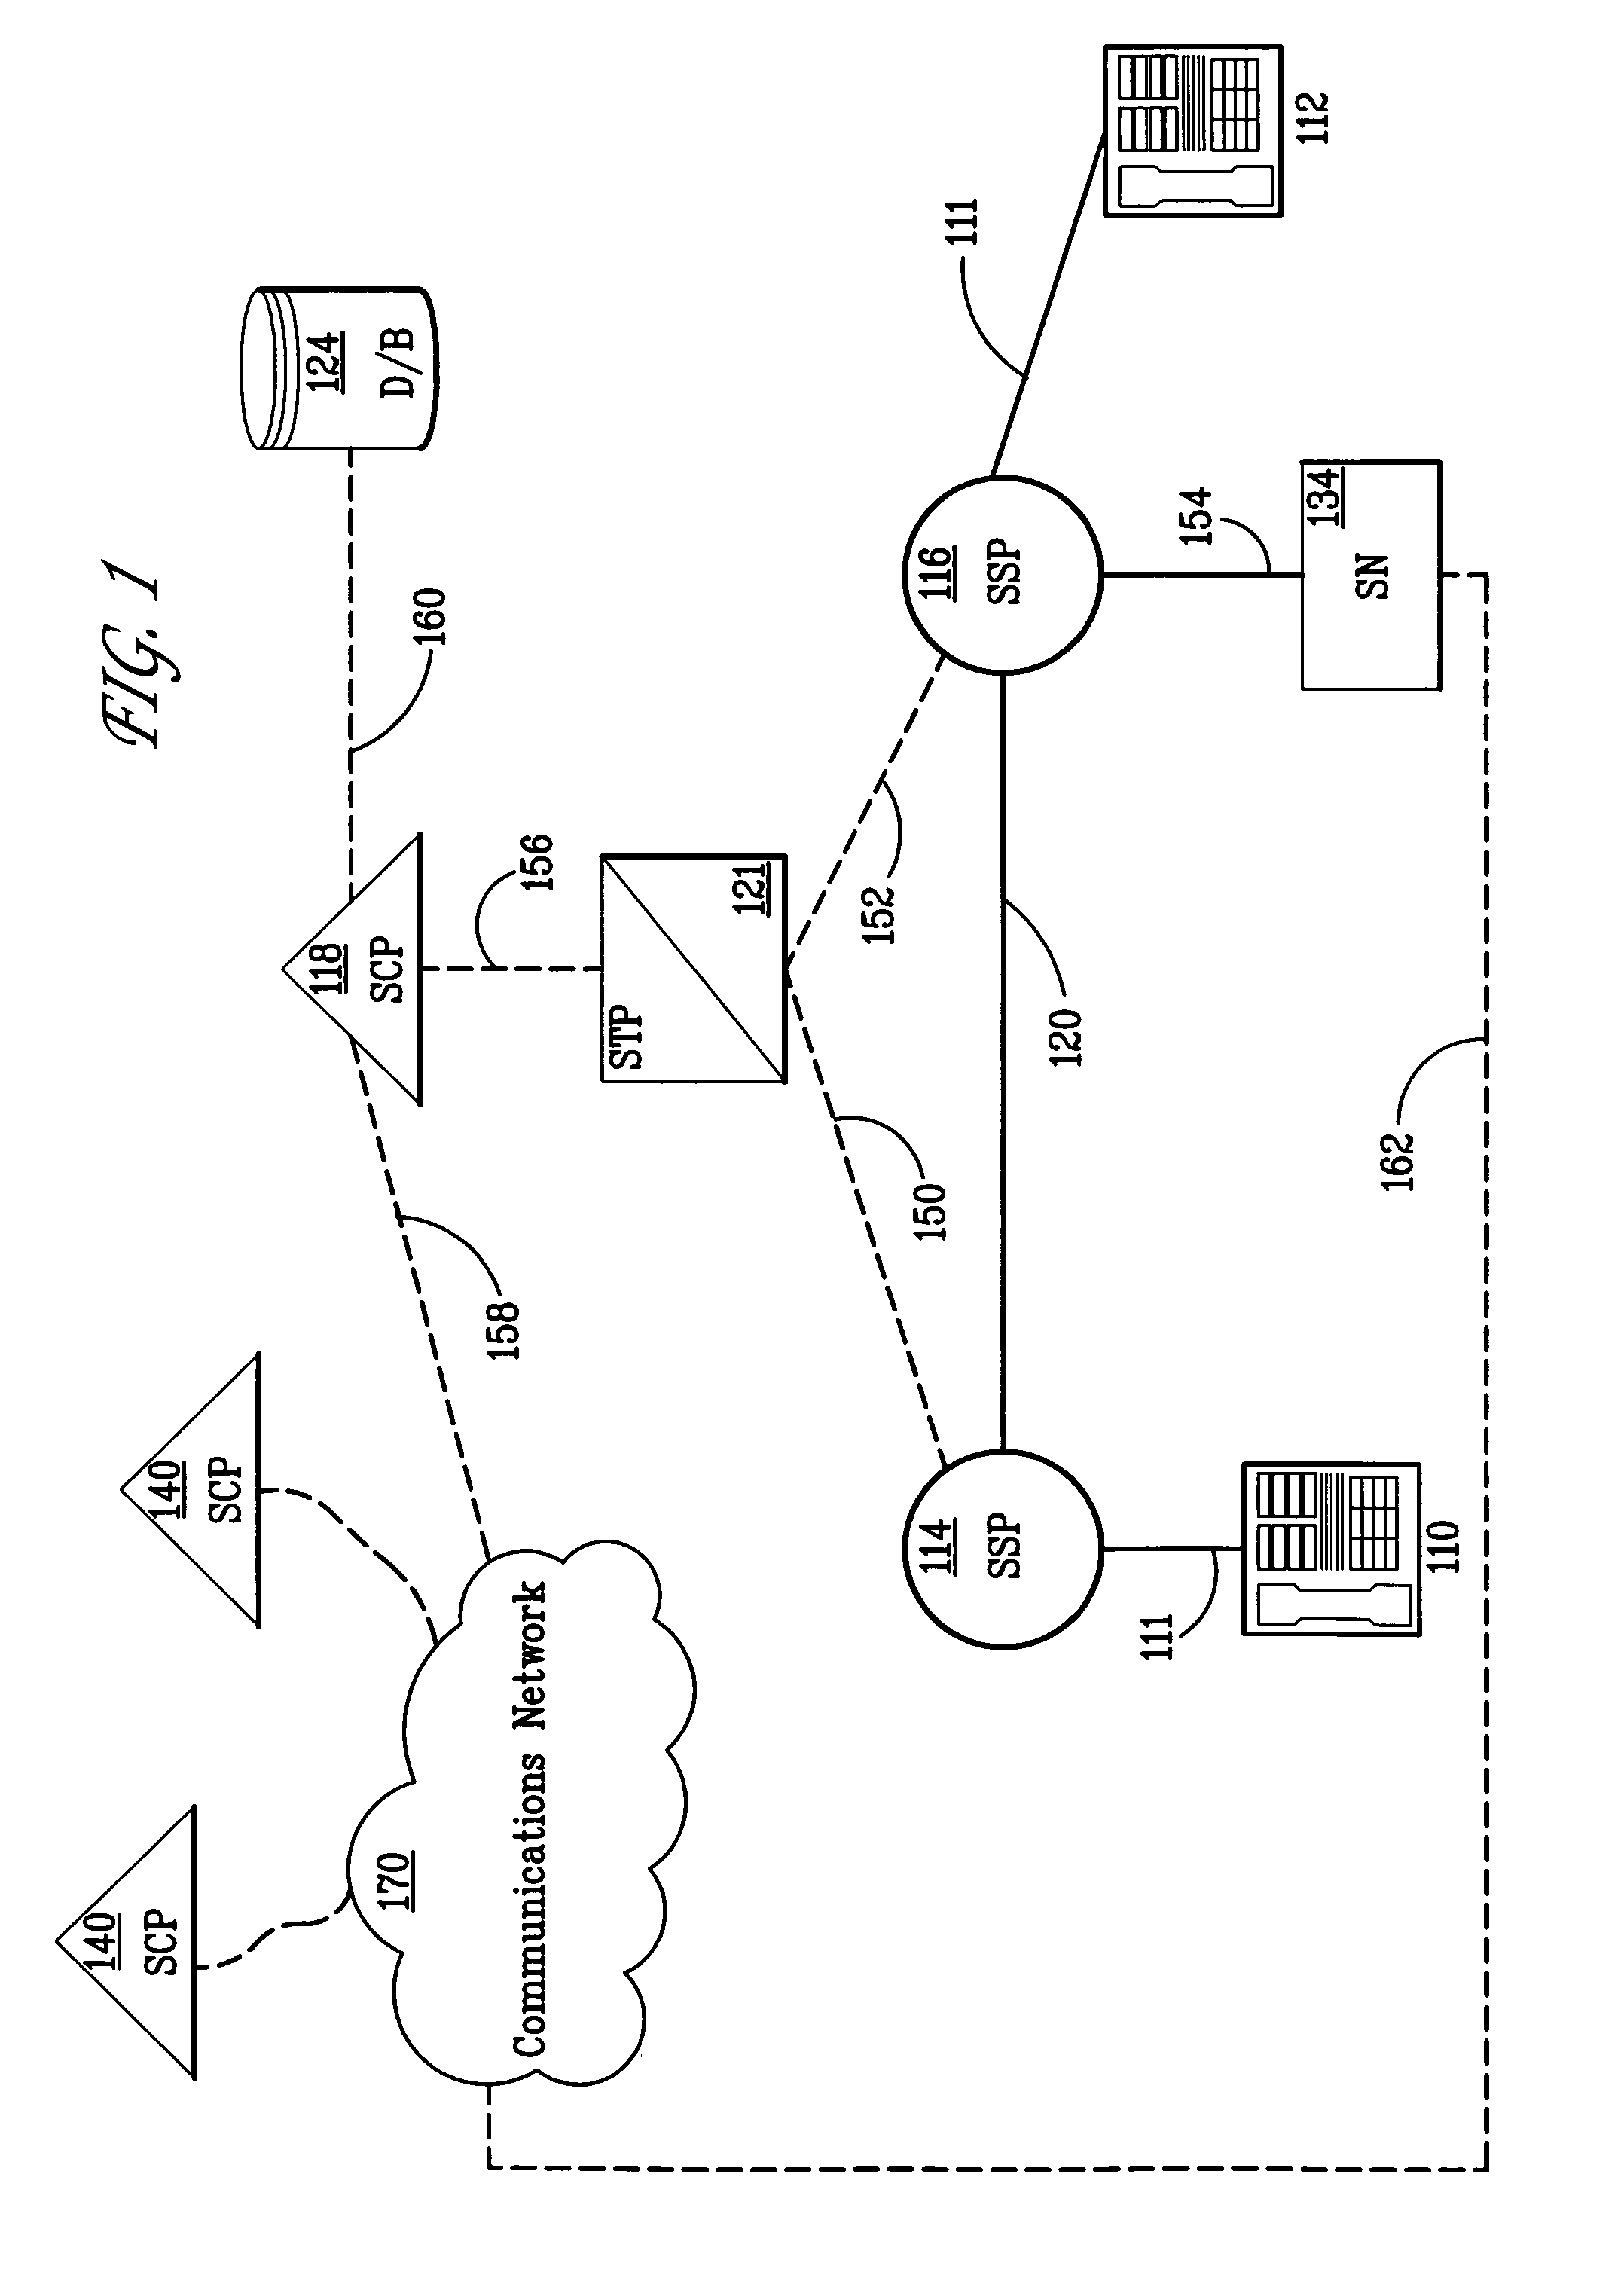 System and method for audio caller identification service